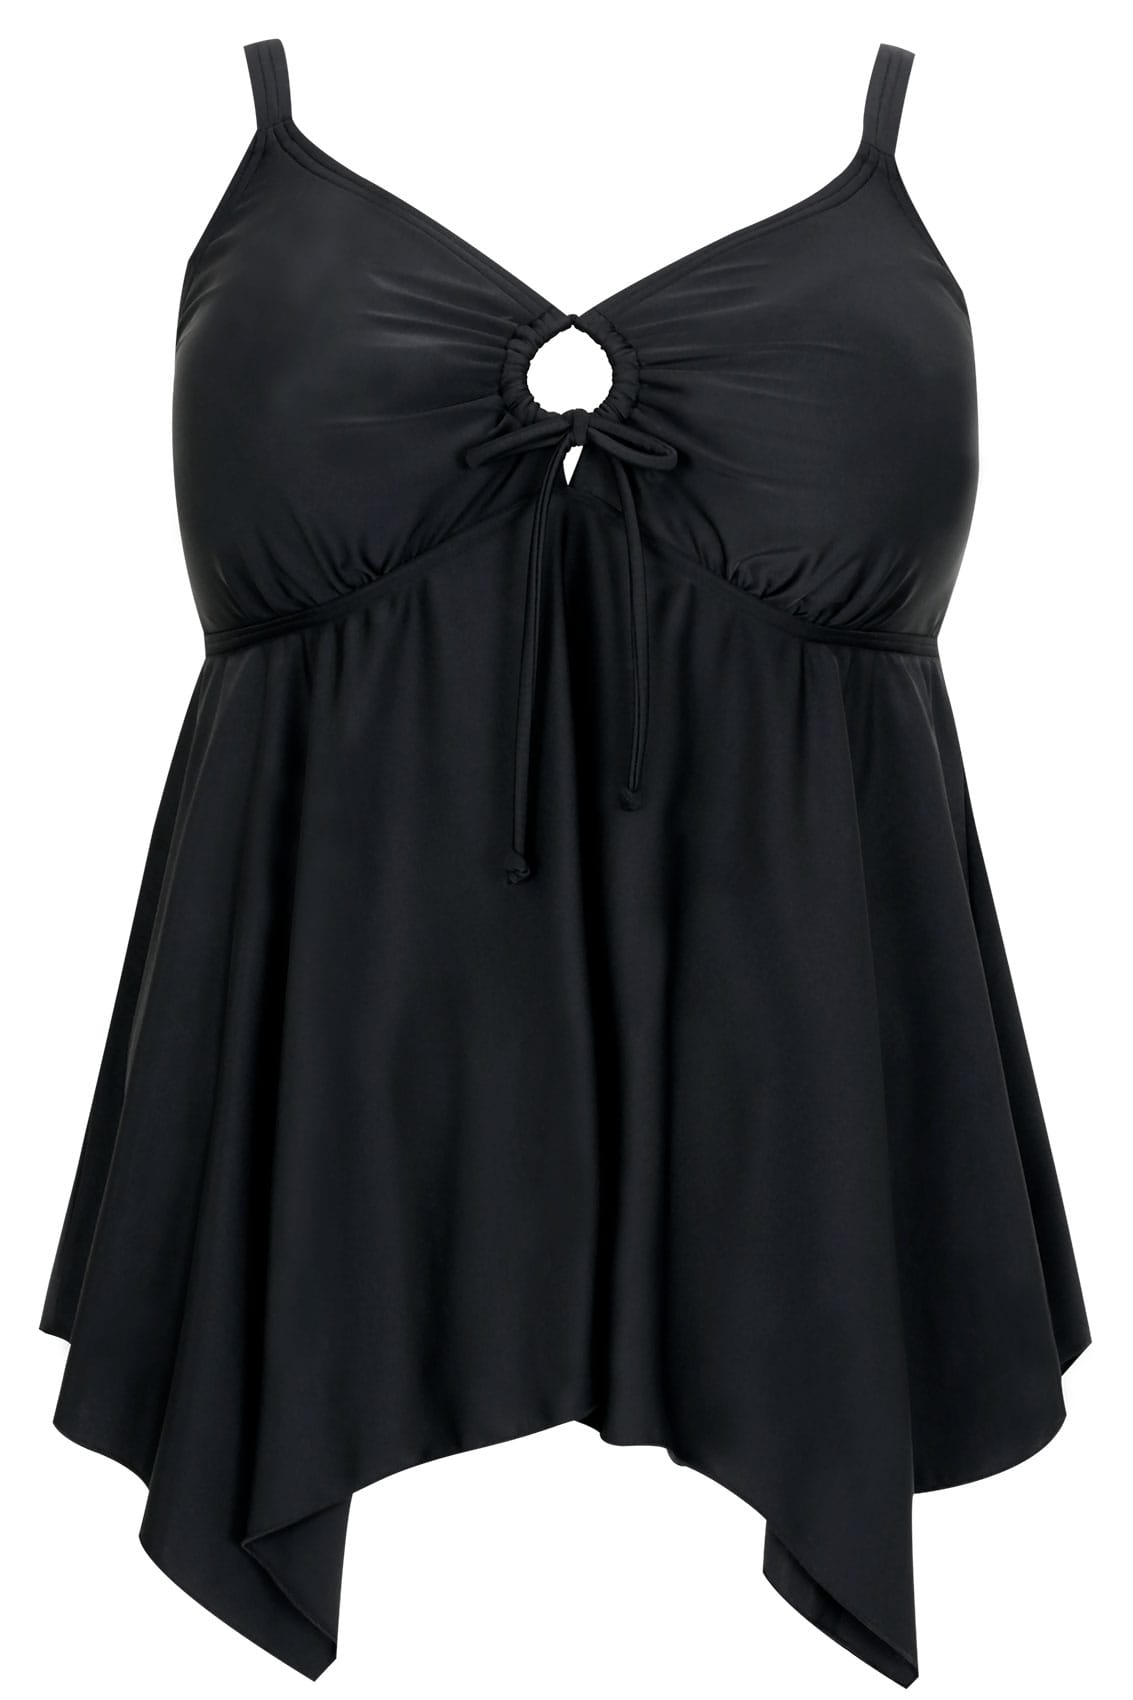 Black Hanky Hem Tankini Top With Cut Out Circle Detail plus size 16 to 36